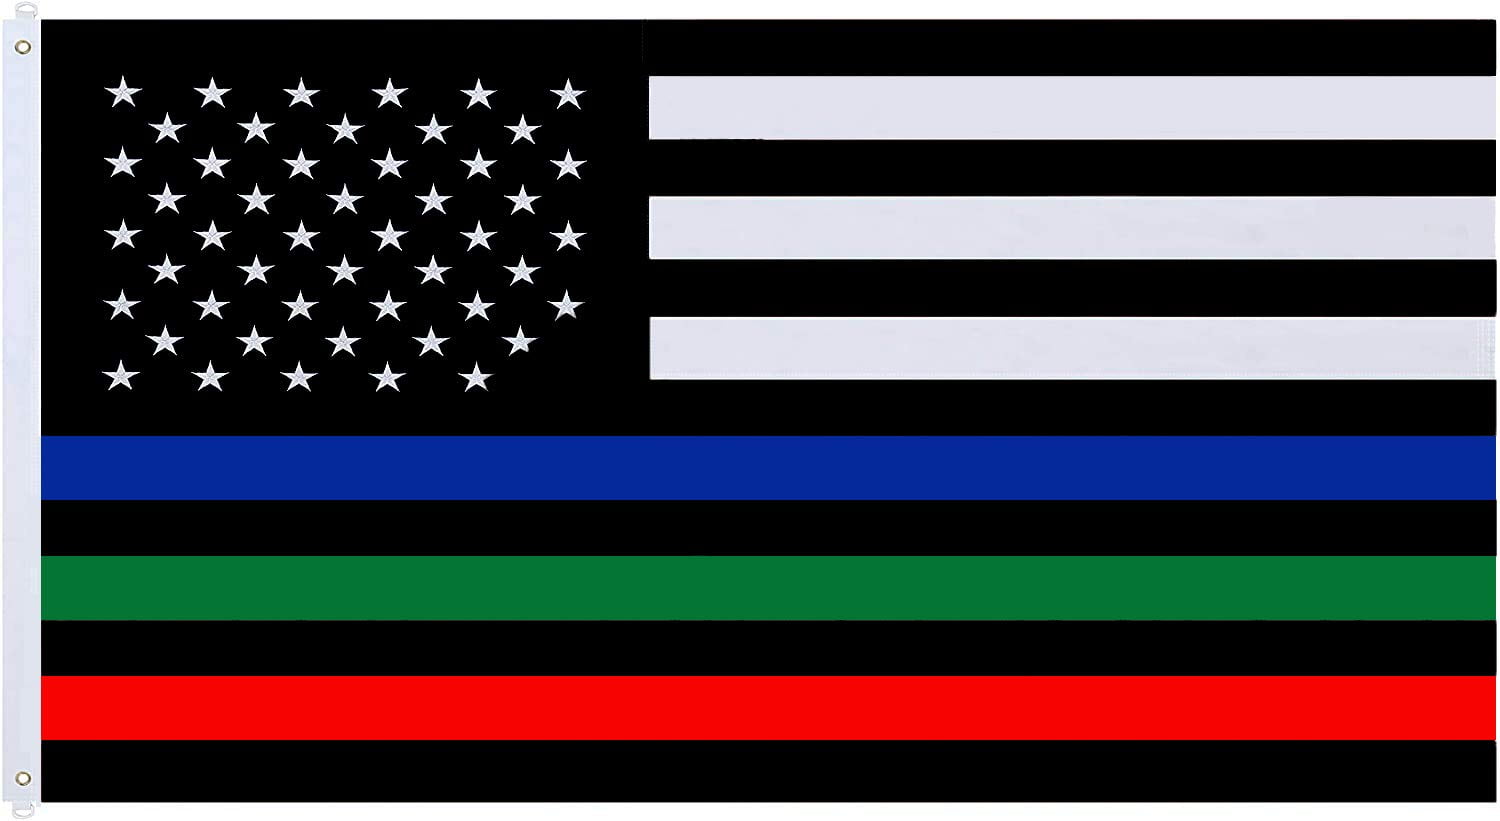 Military FREE SHIP 3X5FT Fire USA THIN BLUE RED GREEN LINE FLAG Police 